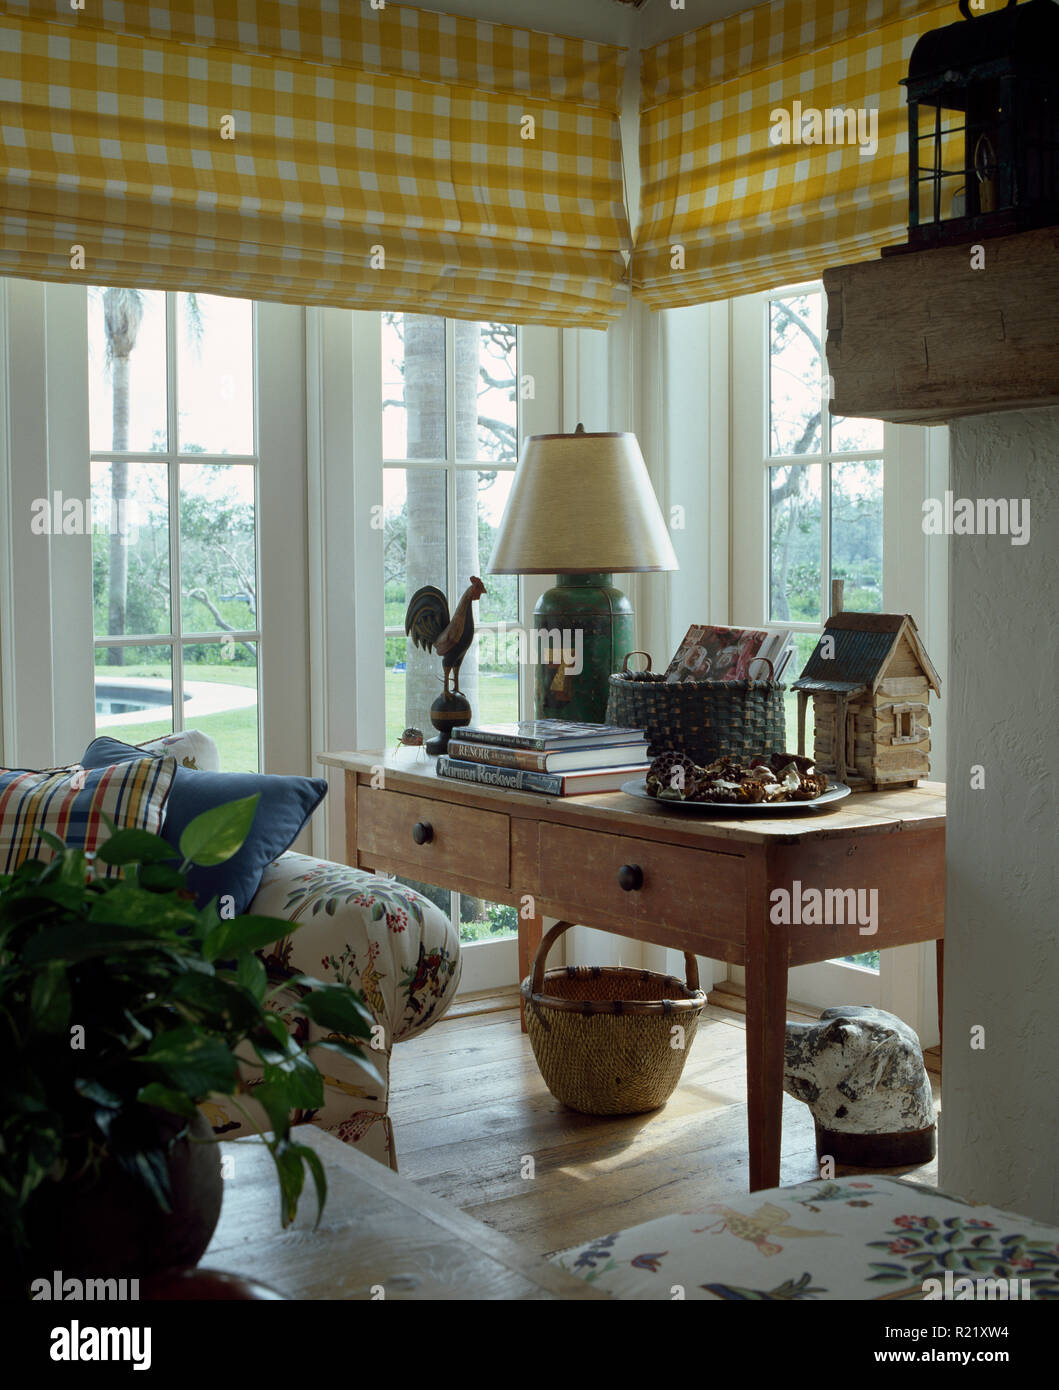 Yellow+white checked blinds on sitting room windows Stock Photo